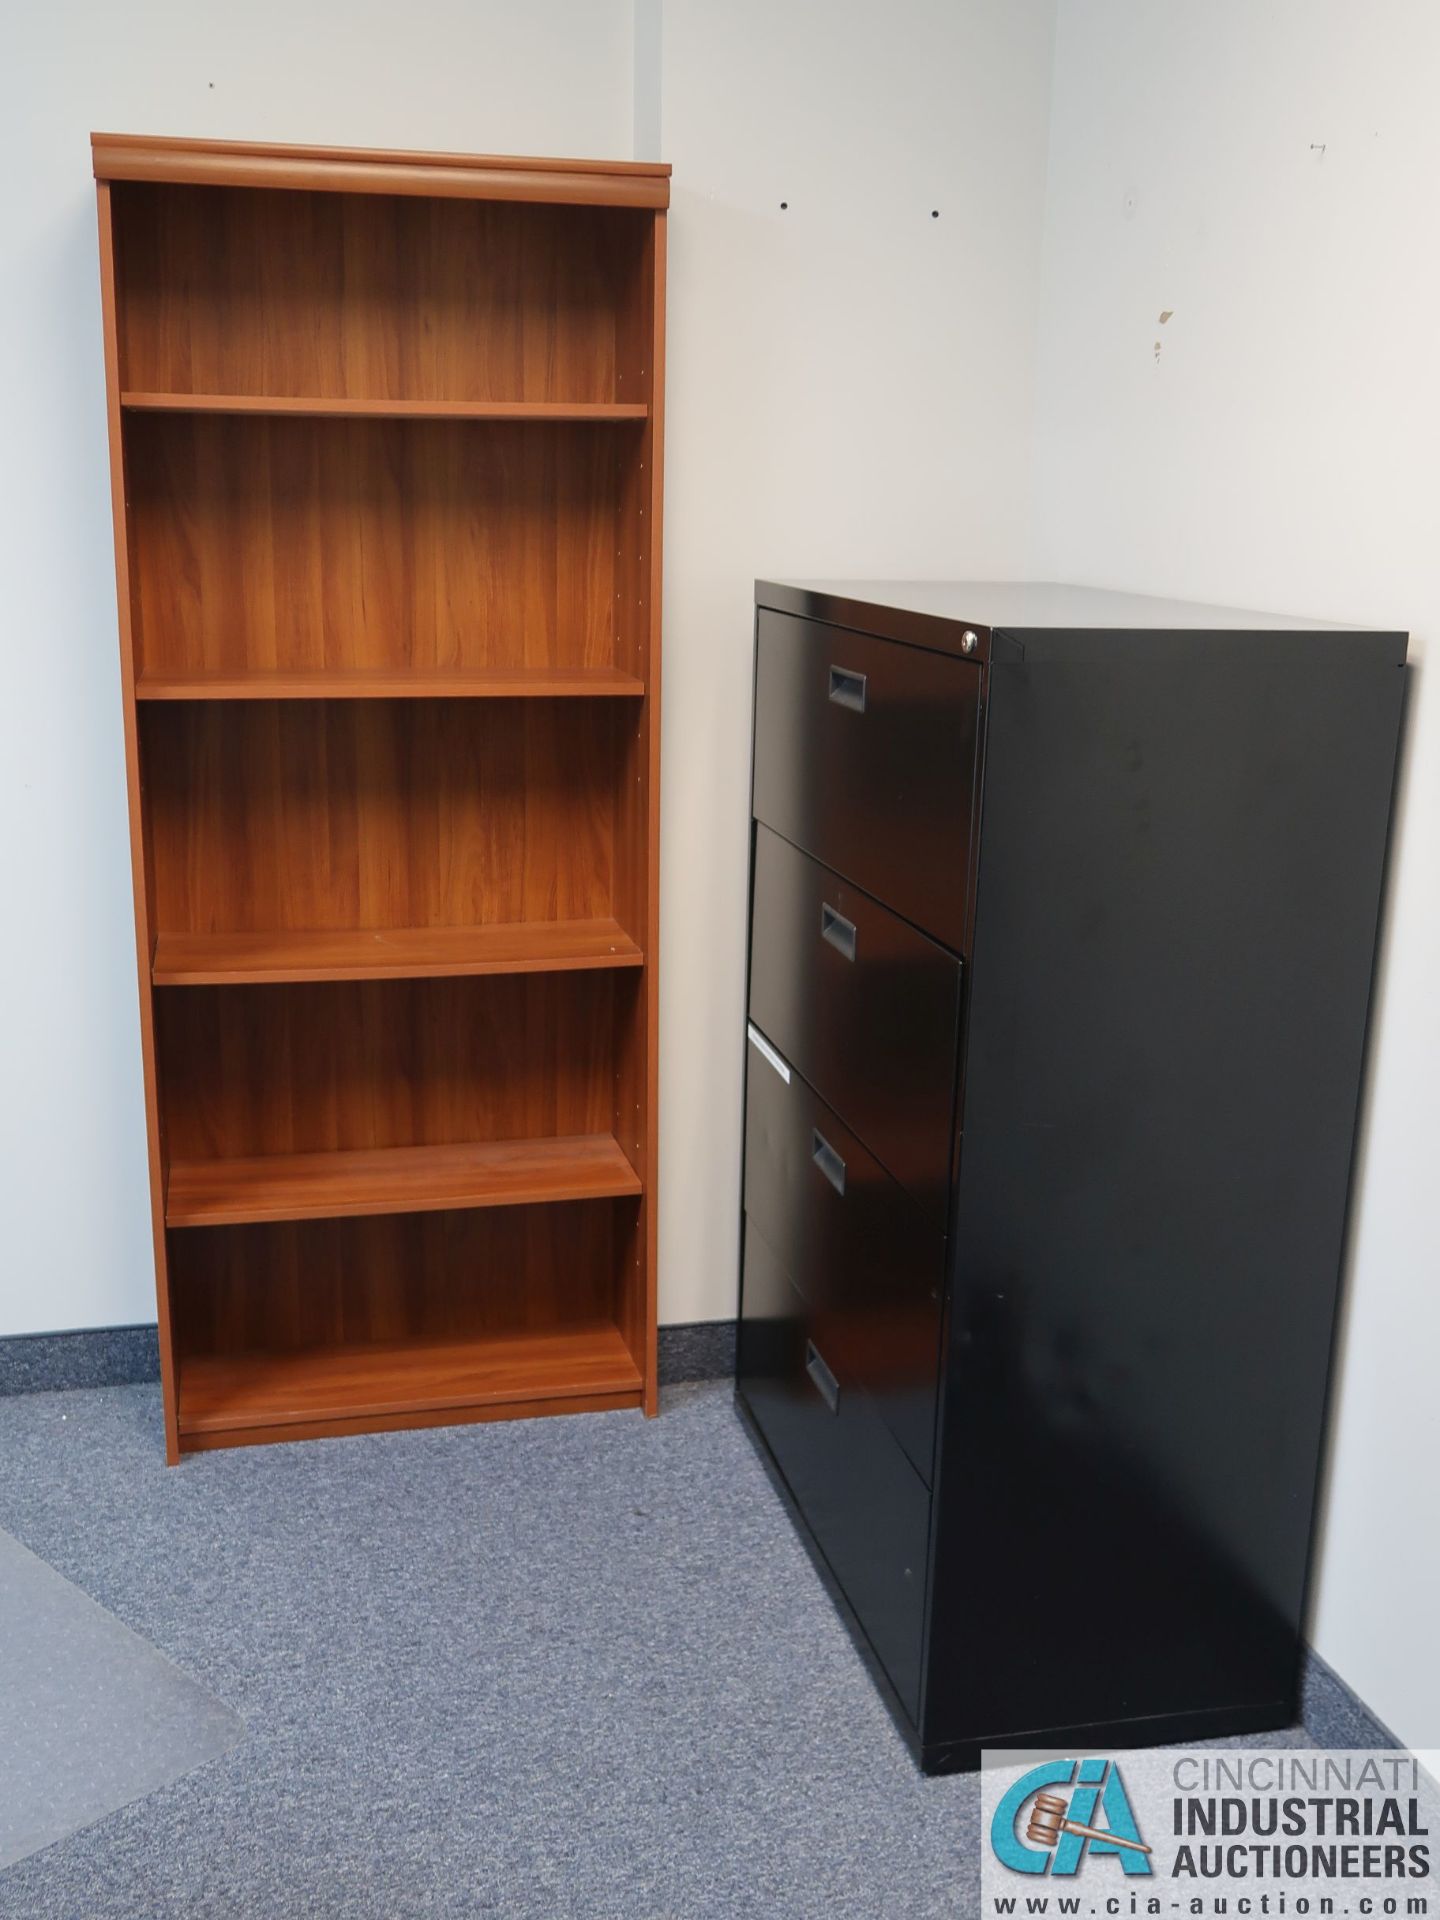 (LOT) C-SHAPED MODULAR DESK WITH FILE CABINETS AND BOOKCASE - Image 3 of 4